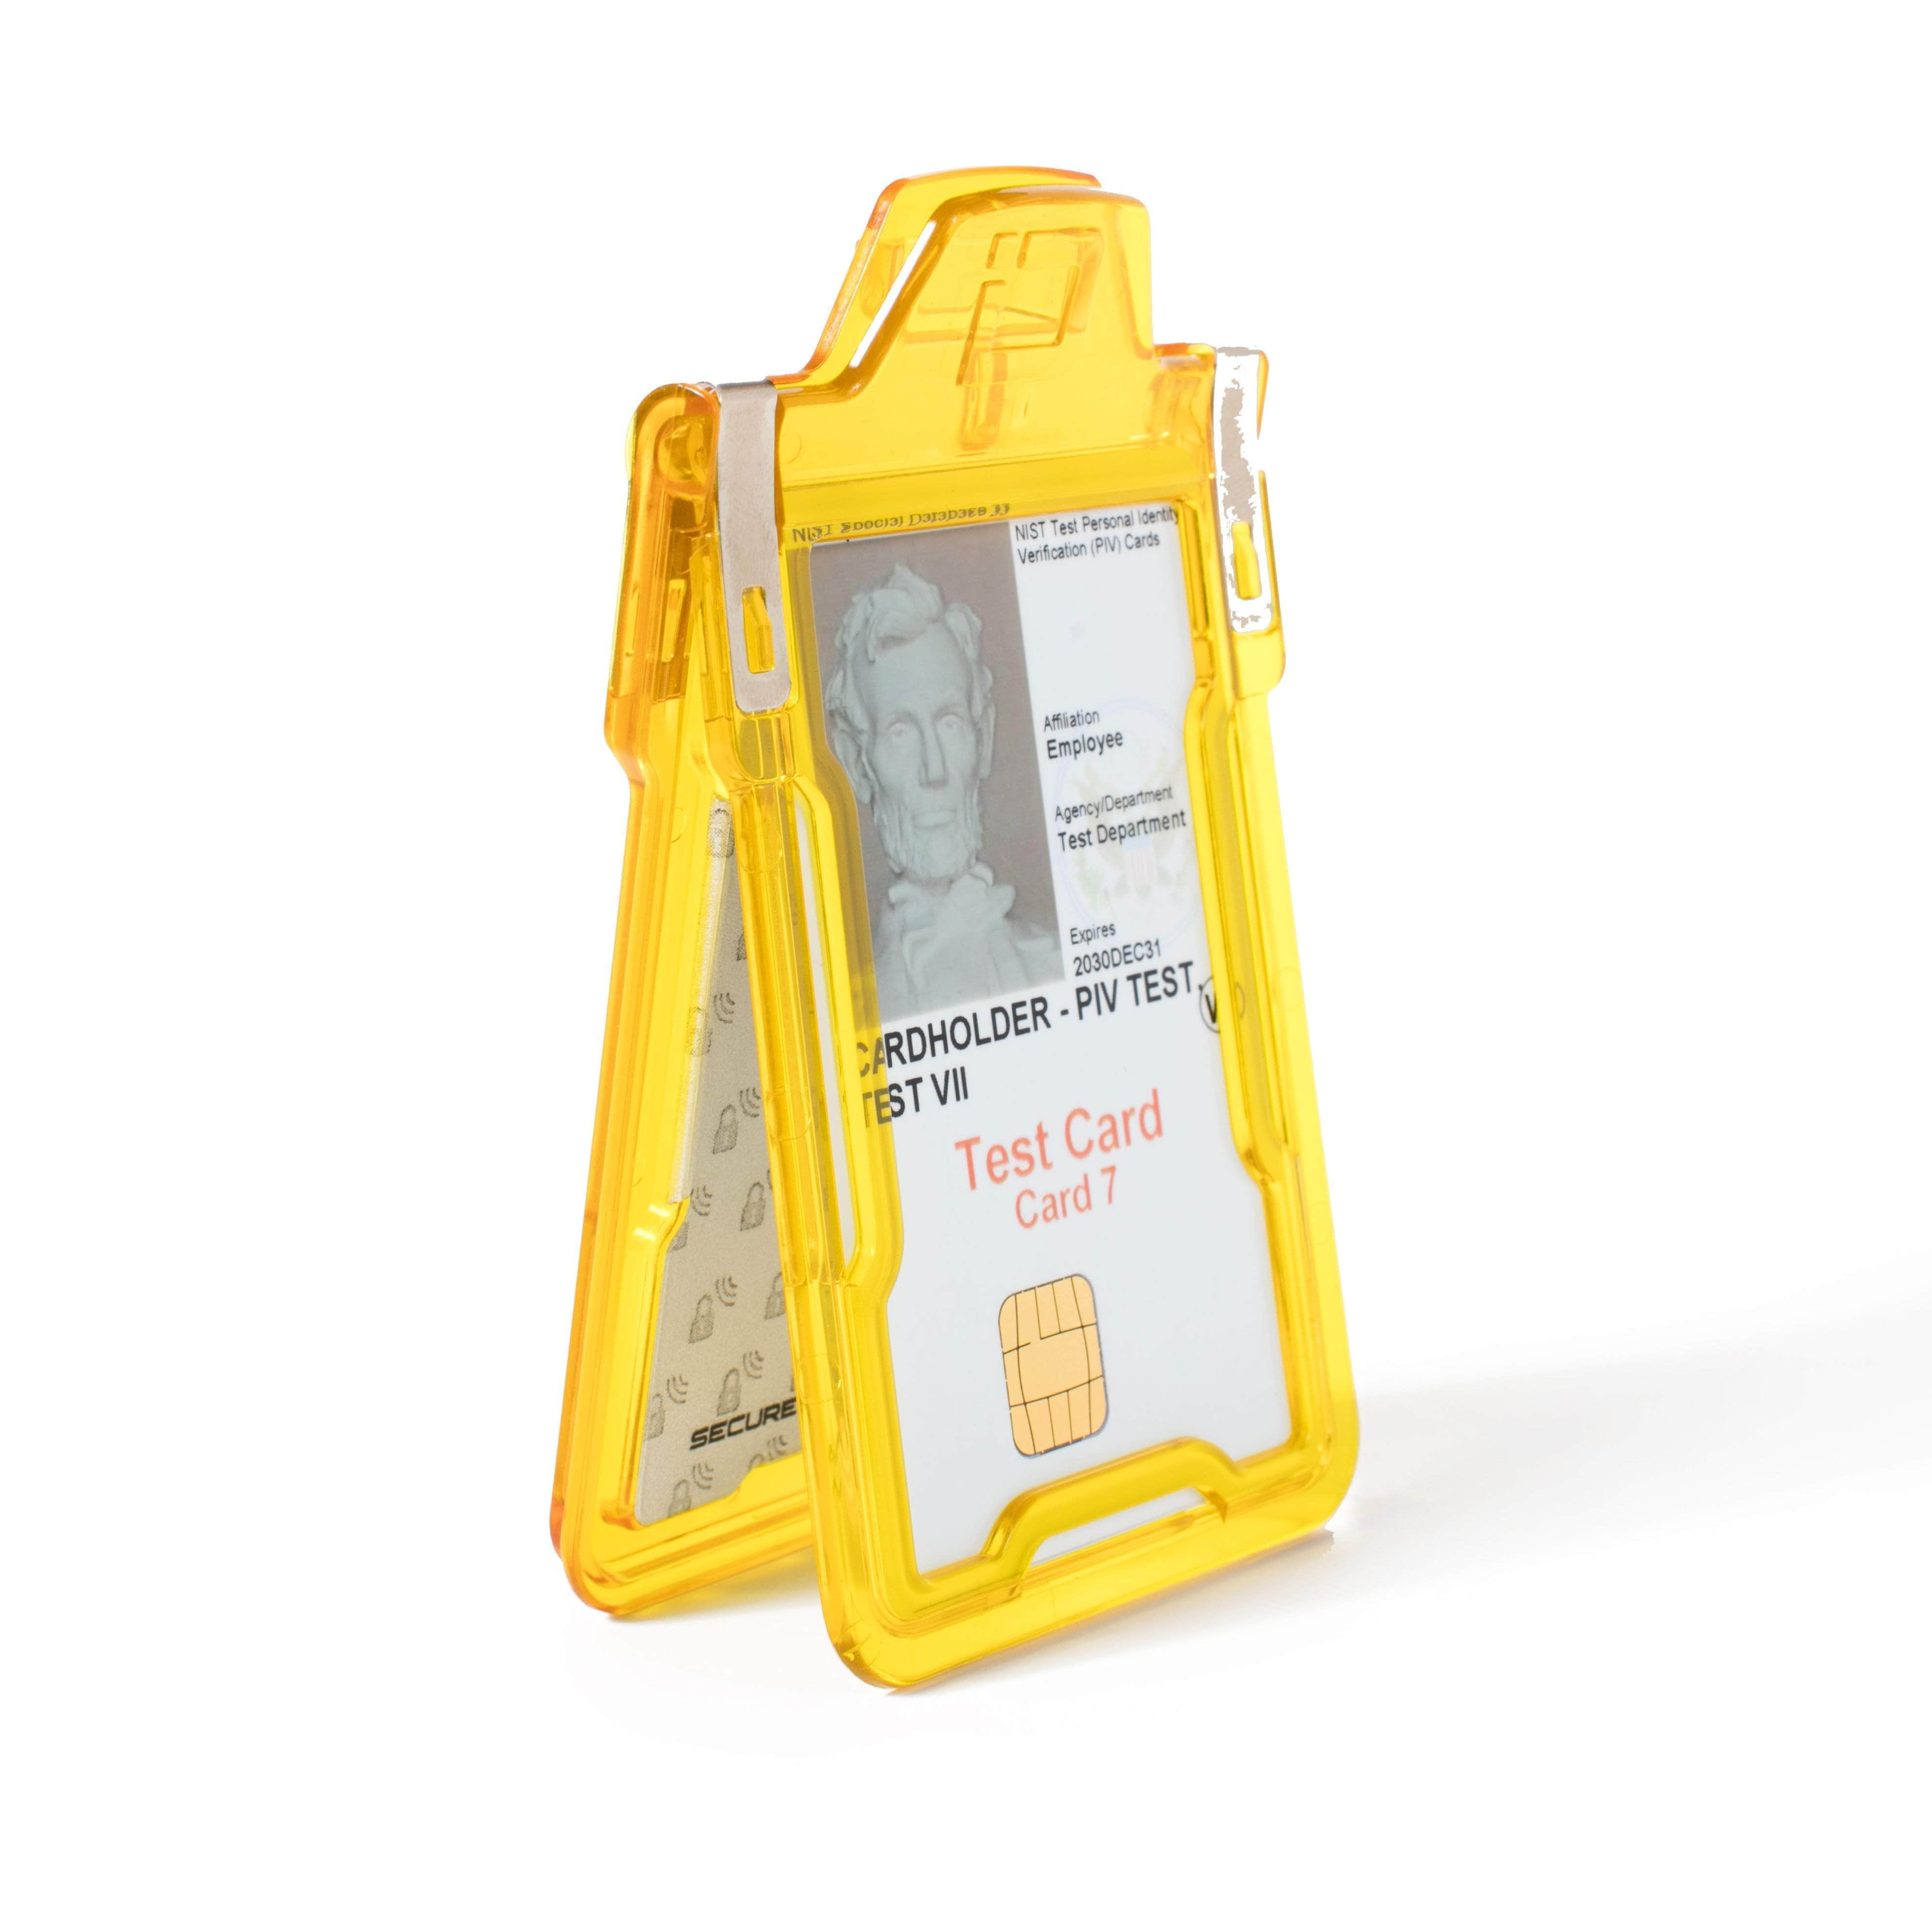 ID Stronghold Badgeholder BloxProx Yellow Secure Badge Holder with BloxProx™ - Protects 125Khz HID Prox 1 Card Holder